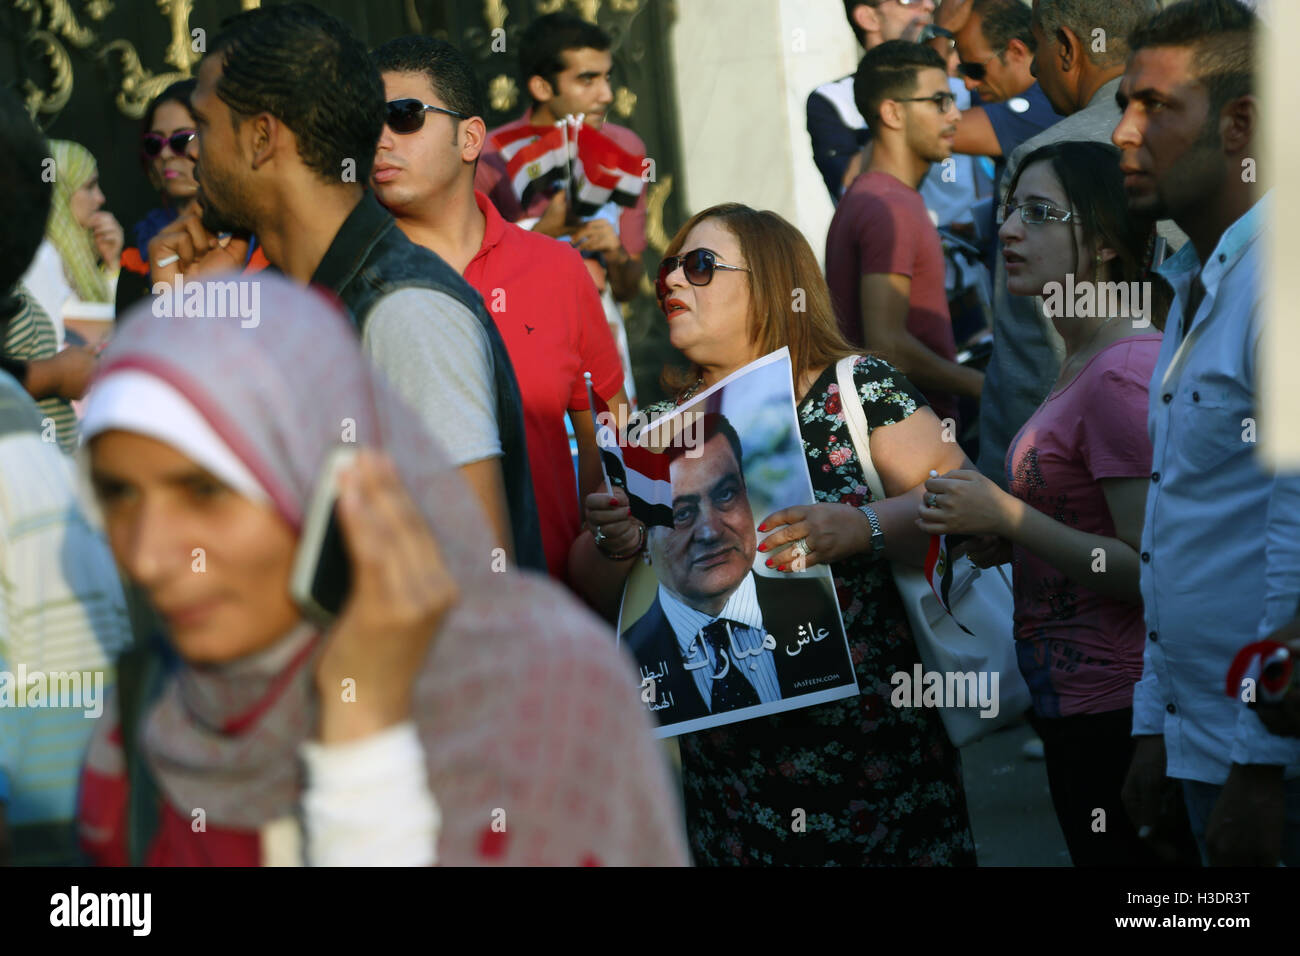 Cairo, Egypt. 6th Oct, 2016. Supporters of Egypt's former President Hosni Mubarak celebrate the 43rd anniversary of the October 6 War in 1973 against Israel outside Maadi Armed Forces Hospital in Cairo, Egypt, Oct. 6, 2016. © Ahmed Gomaa/Xinhua/Alamy Live News Stock Photo